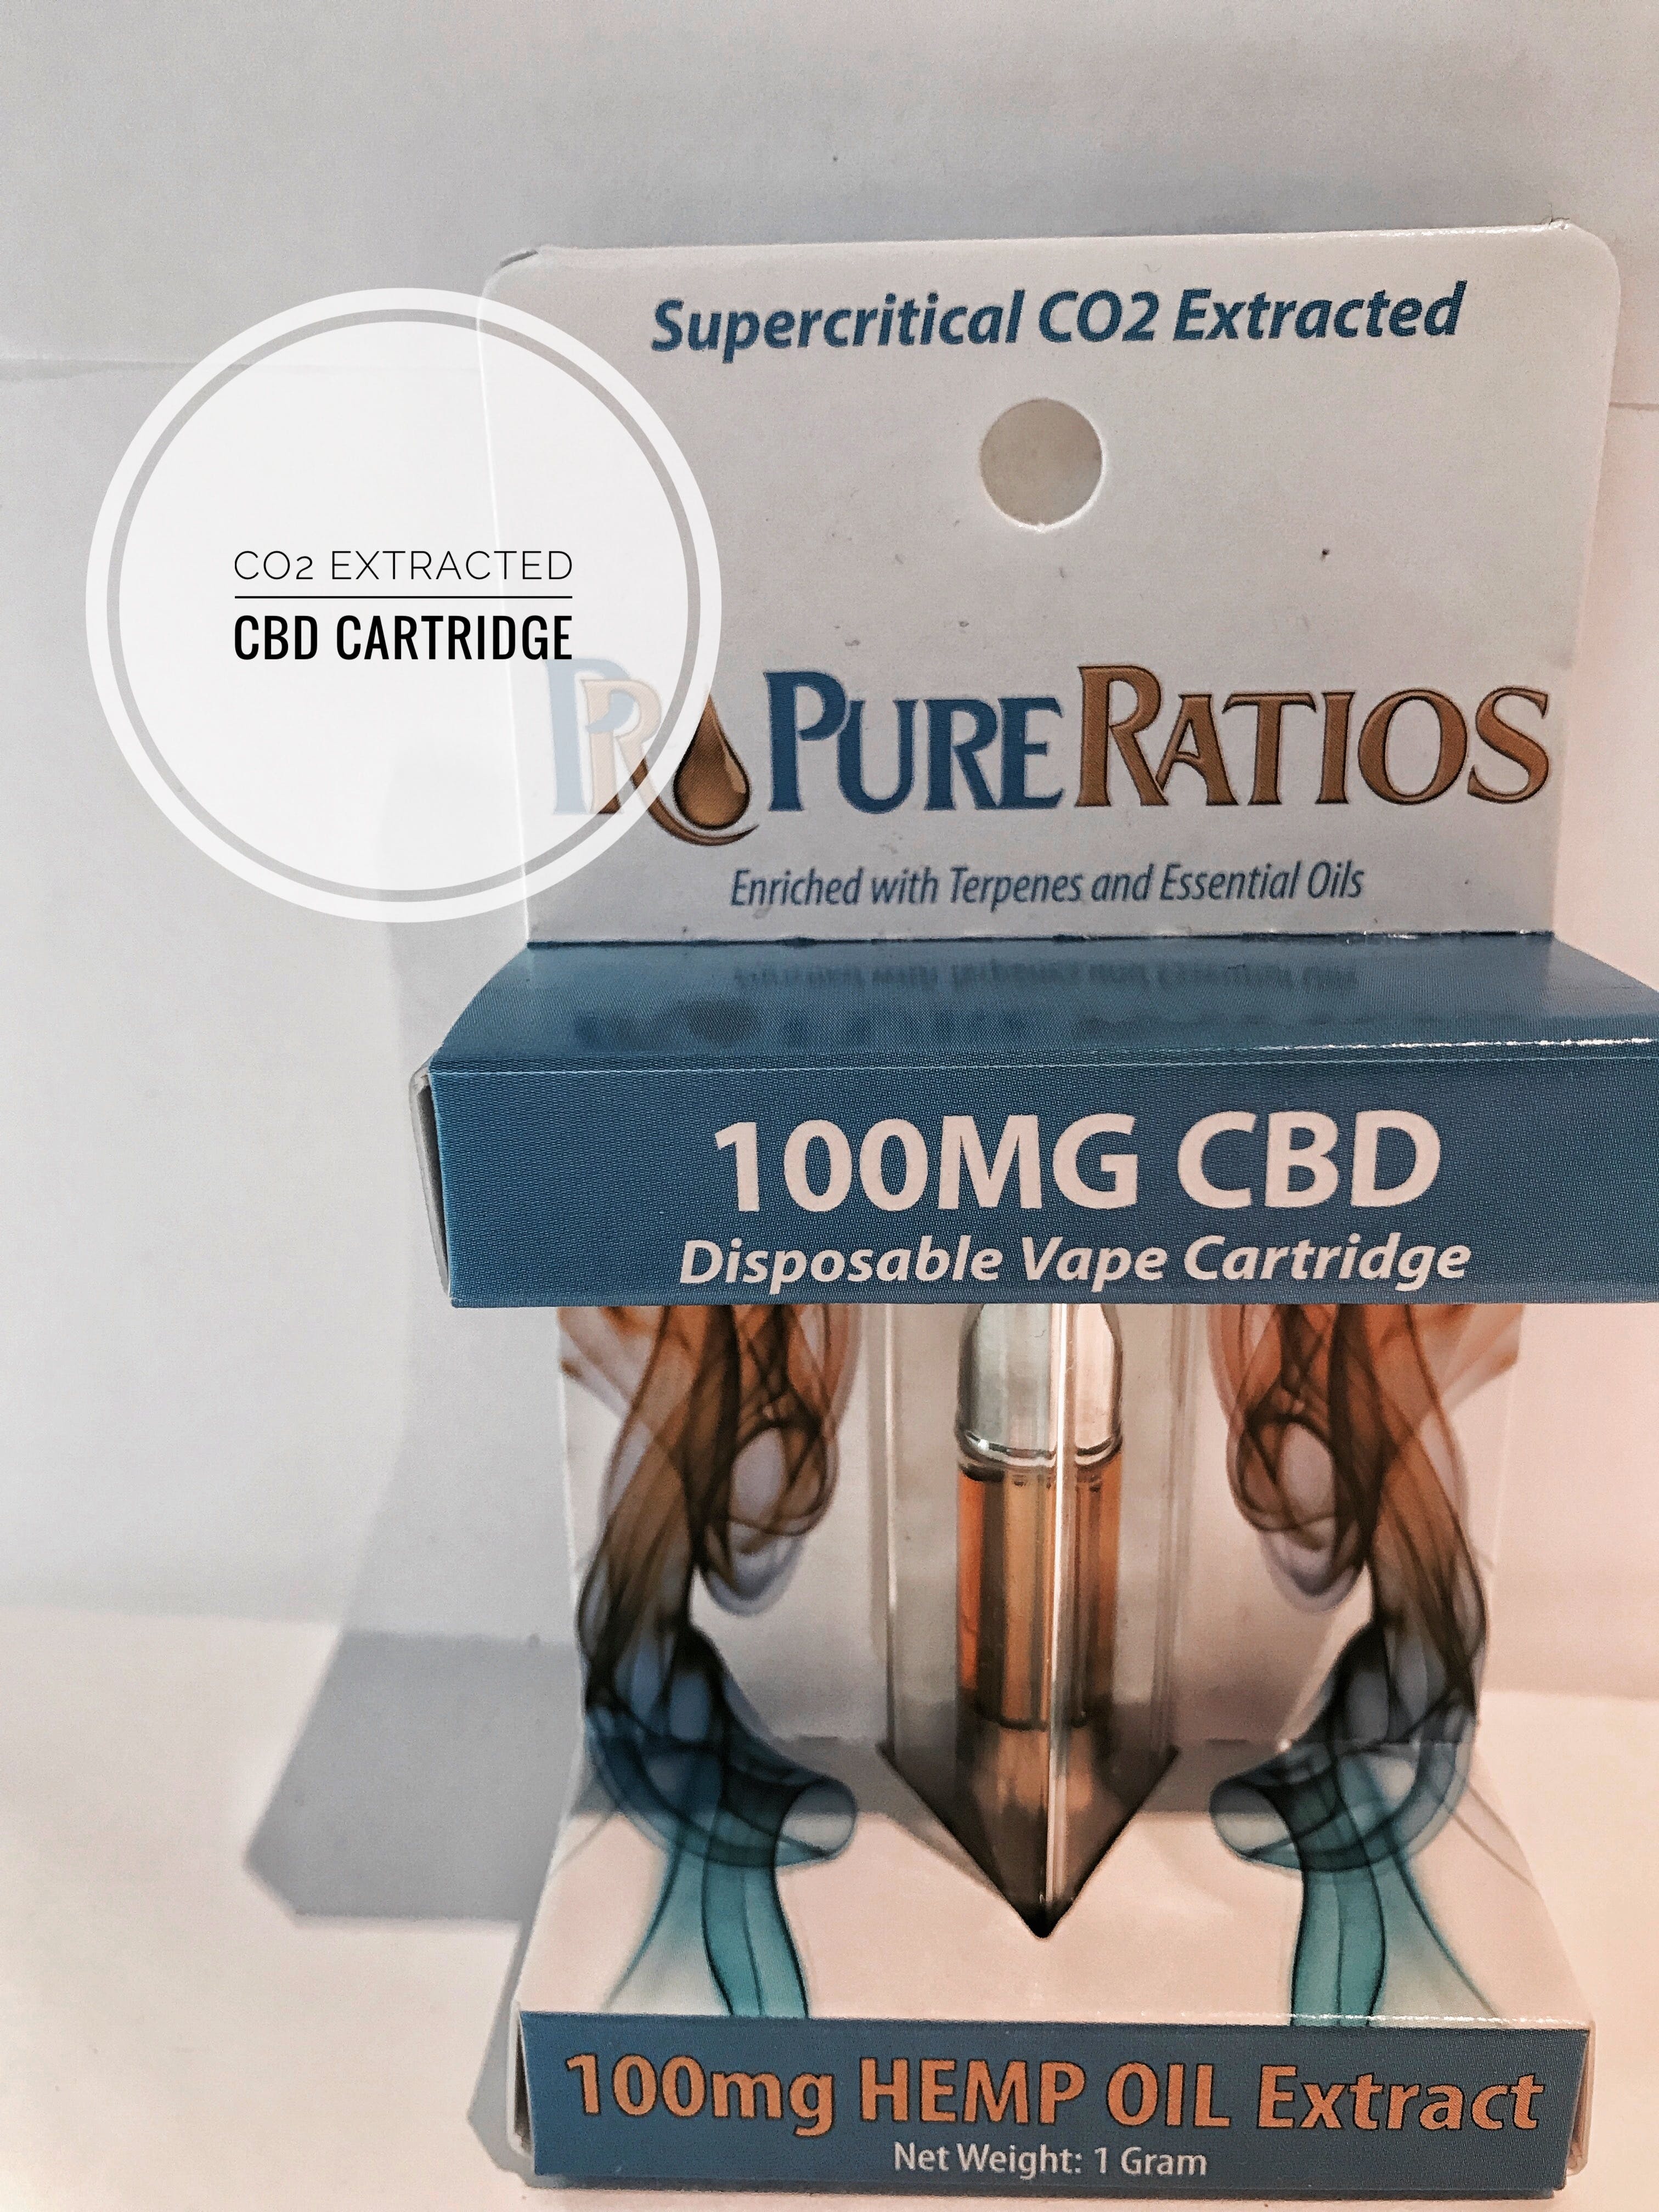 concentrate-pure-ratios-co2-extracted-cbd-cartridge